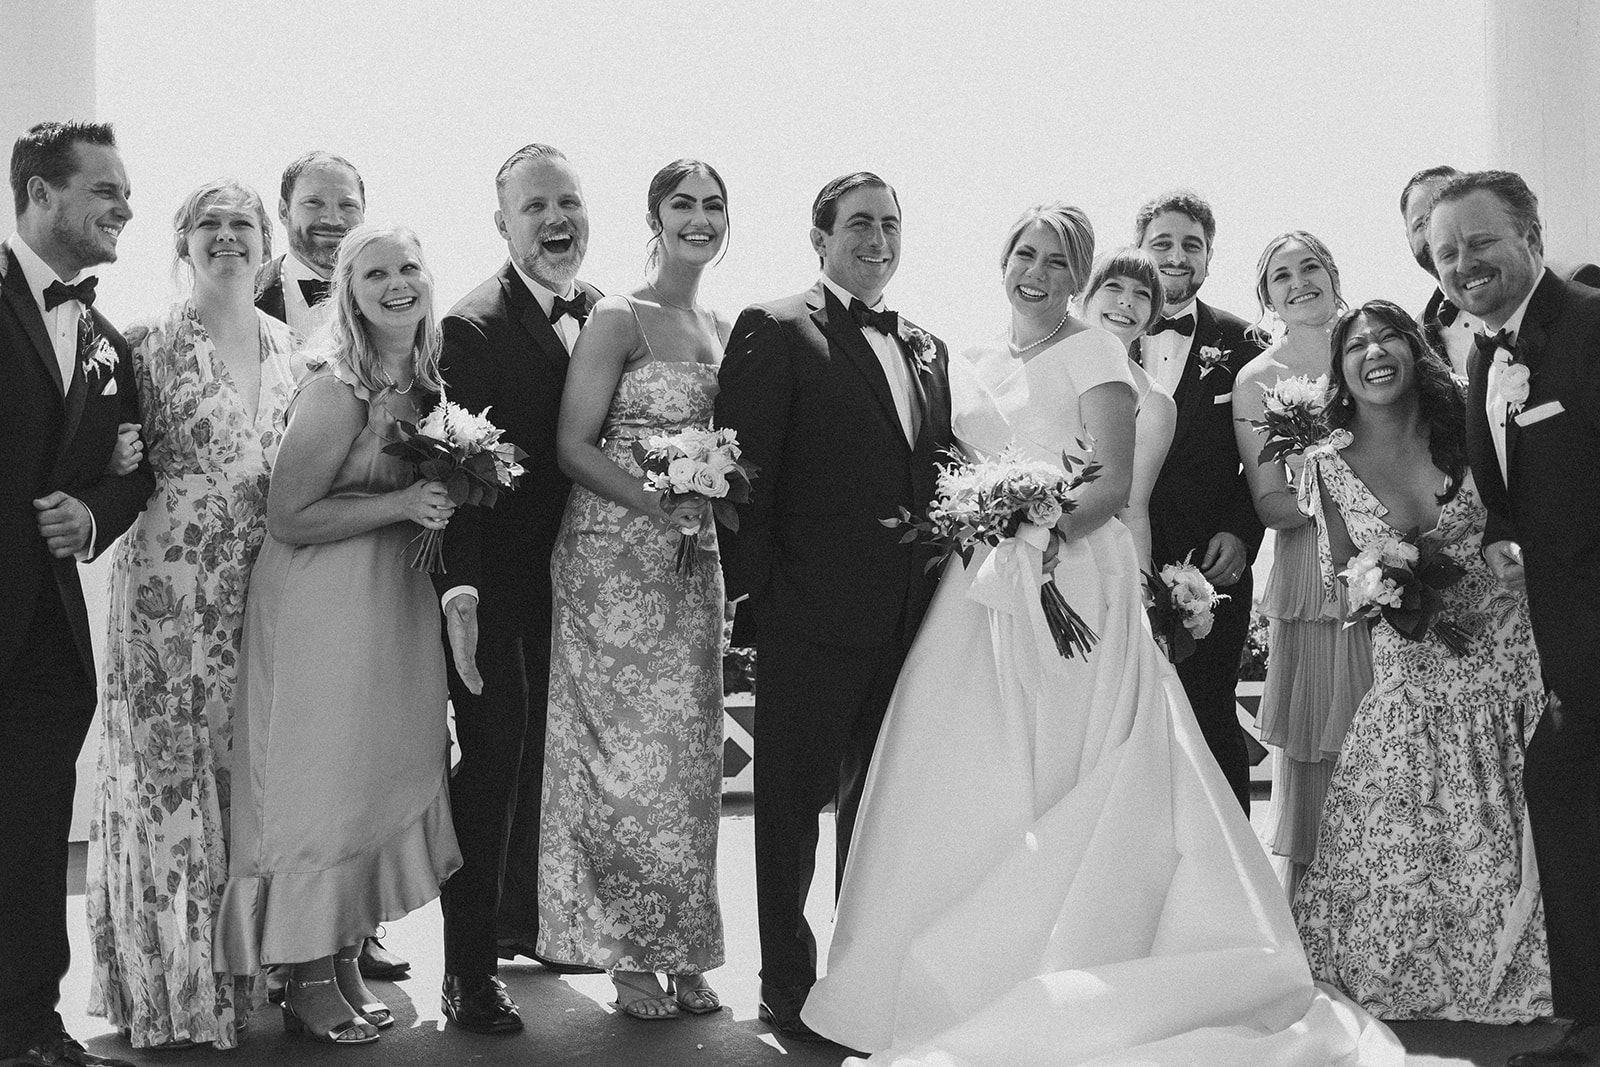 Black tie wedding party photos on the front porch of the Grand Hotel in Mackinac Island